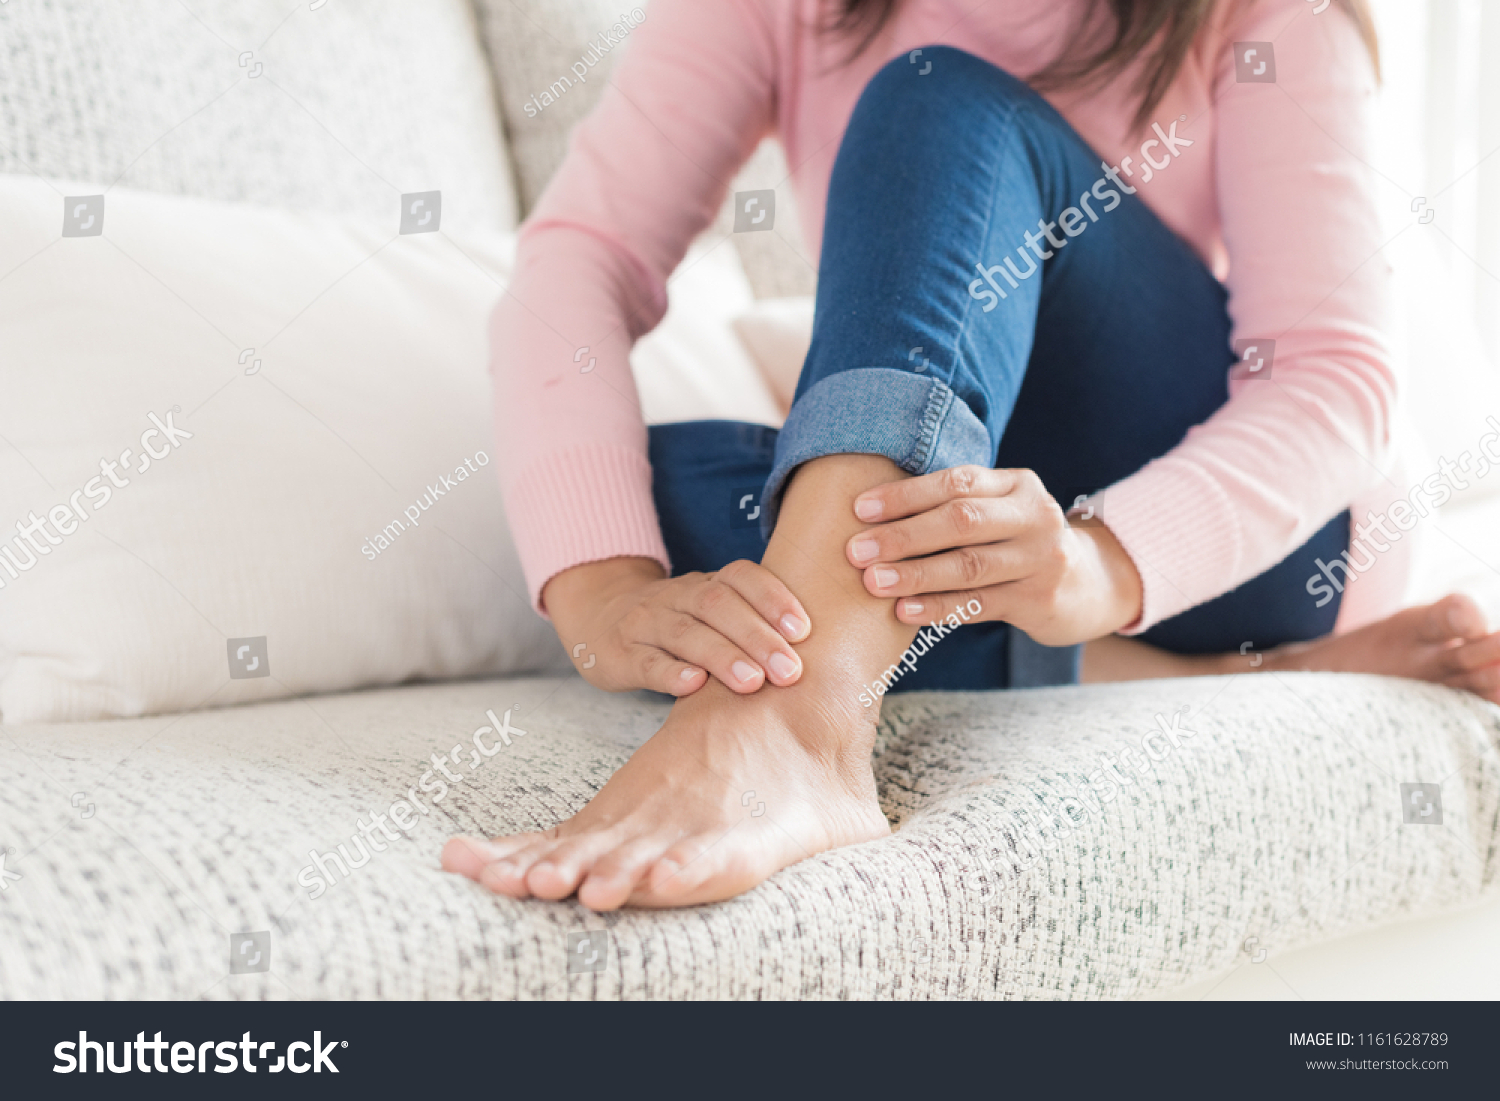 Closeup woman sitting on sofa holds her ankle injury, feeling pain. Health care and medical concept. #1161628789